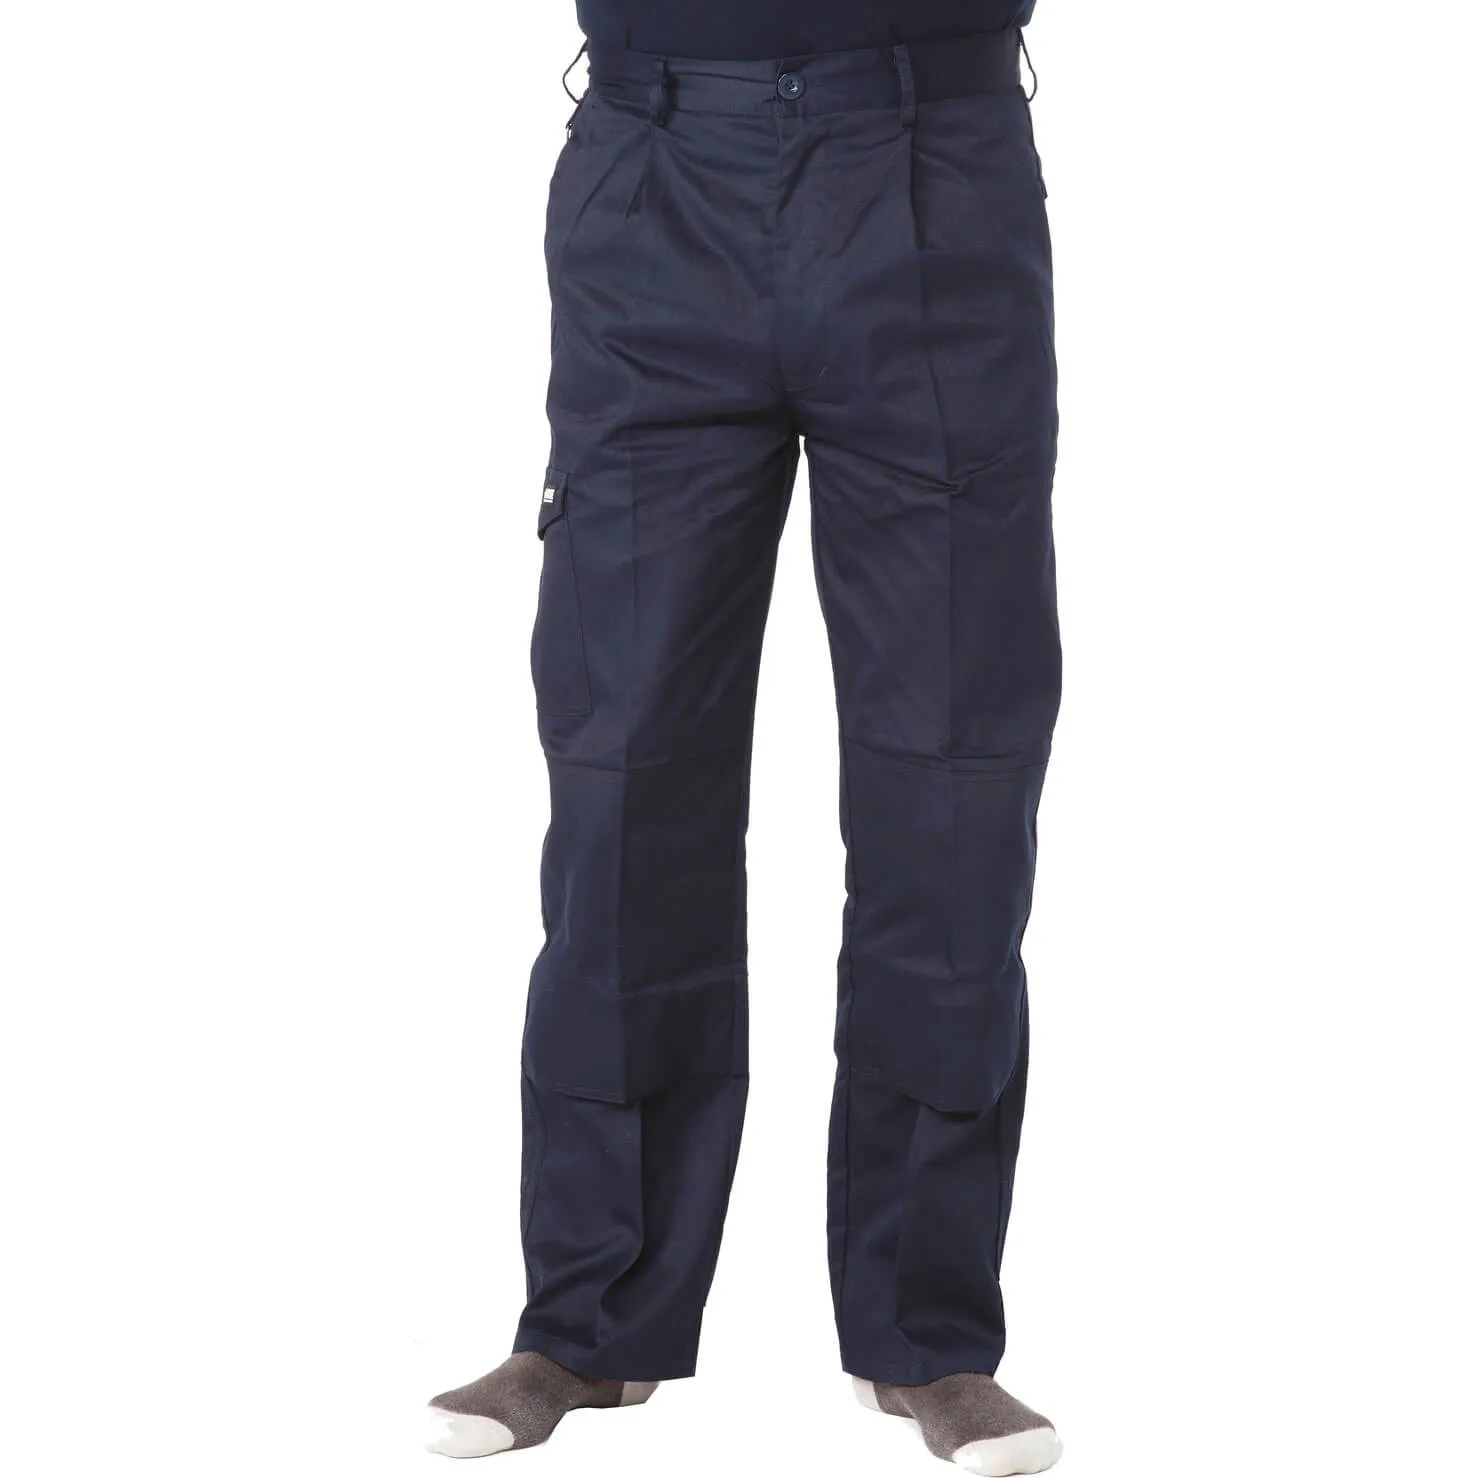 Apache Mens Industry Trousers - Navy Blue, 38", 33"